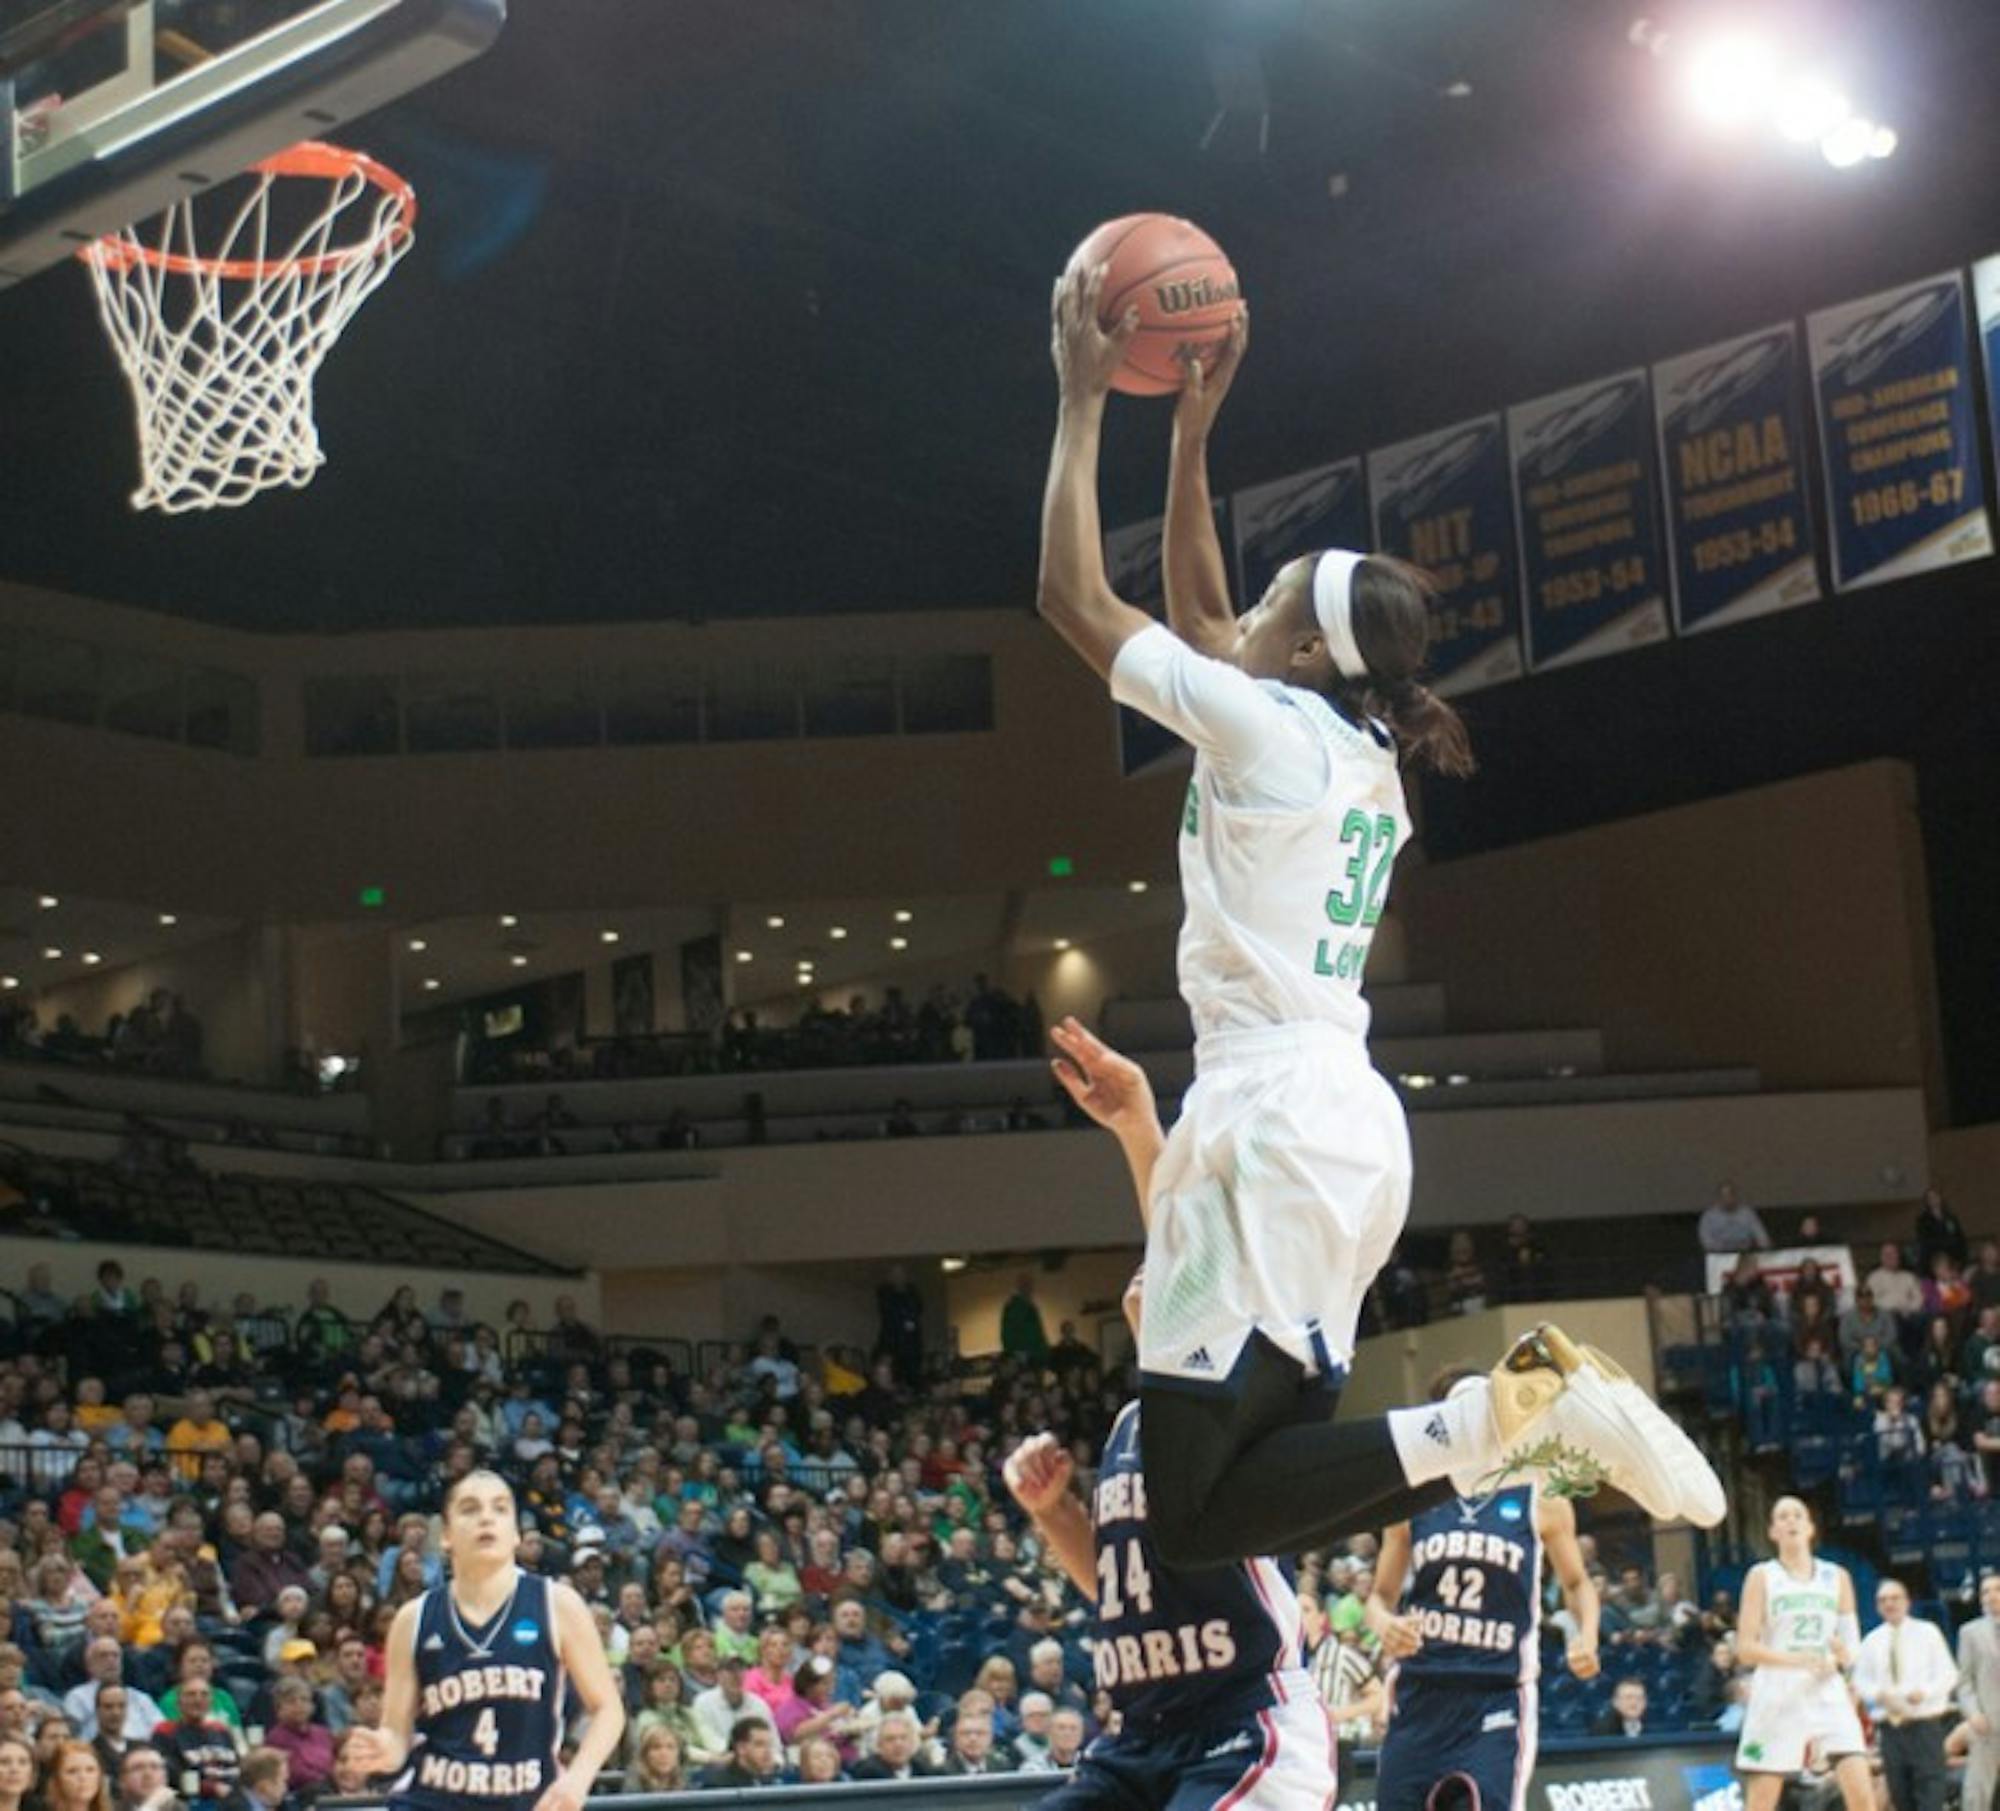 Irish sophomore guard Jewell Loyd goes up for a jumpshot during Notre Dame's 93-42 win over Robert Morris in the first round of the NCAA tournament on Mar. 22.